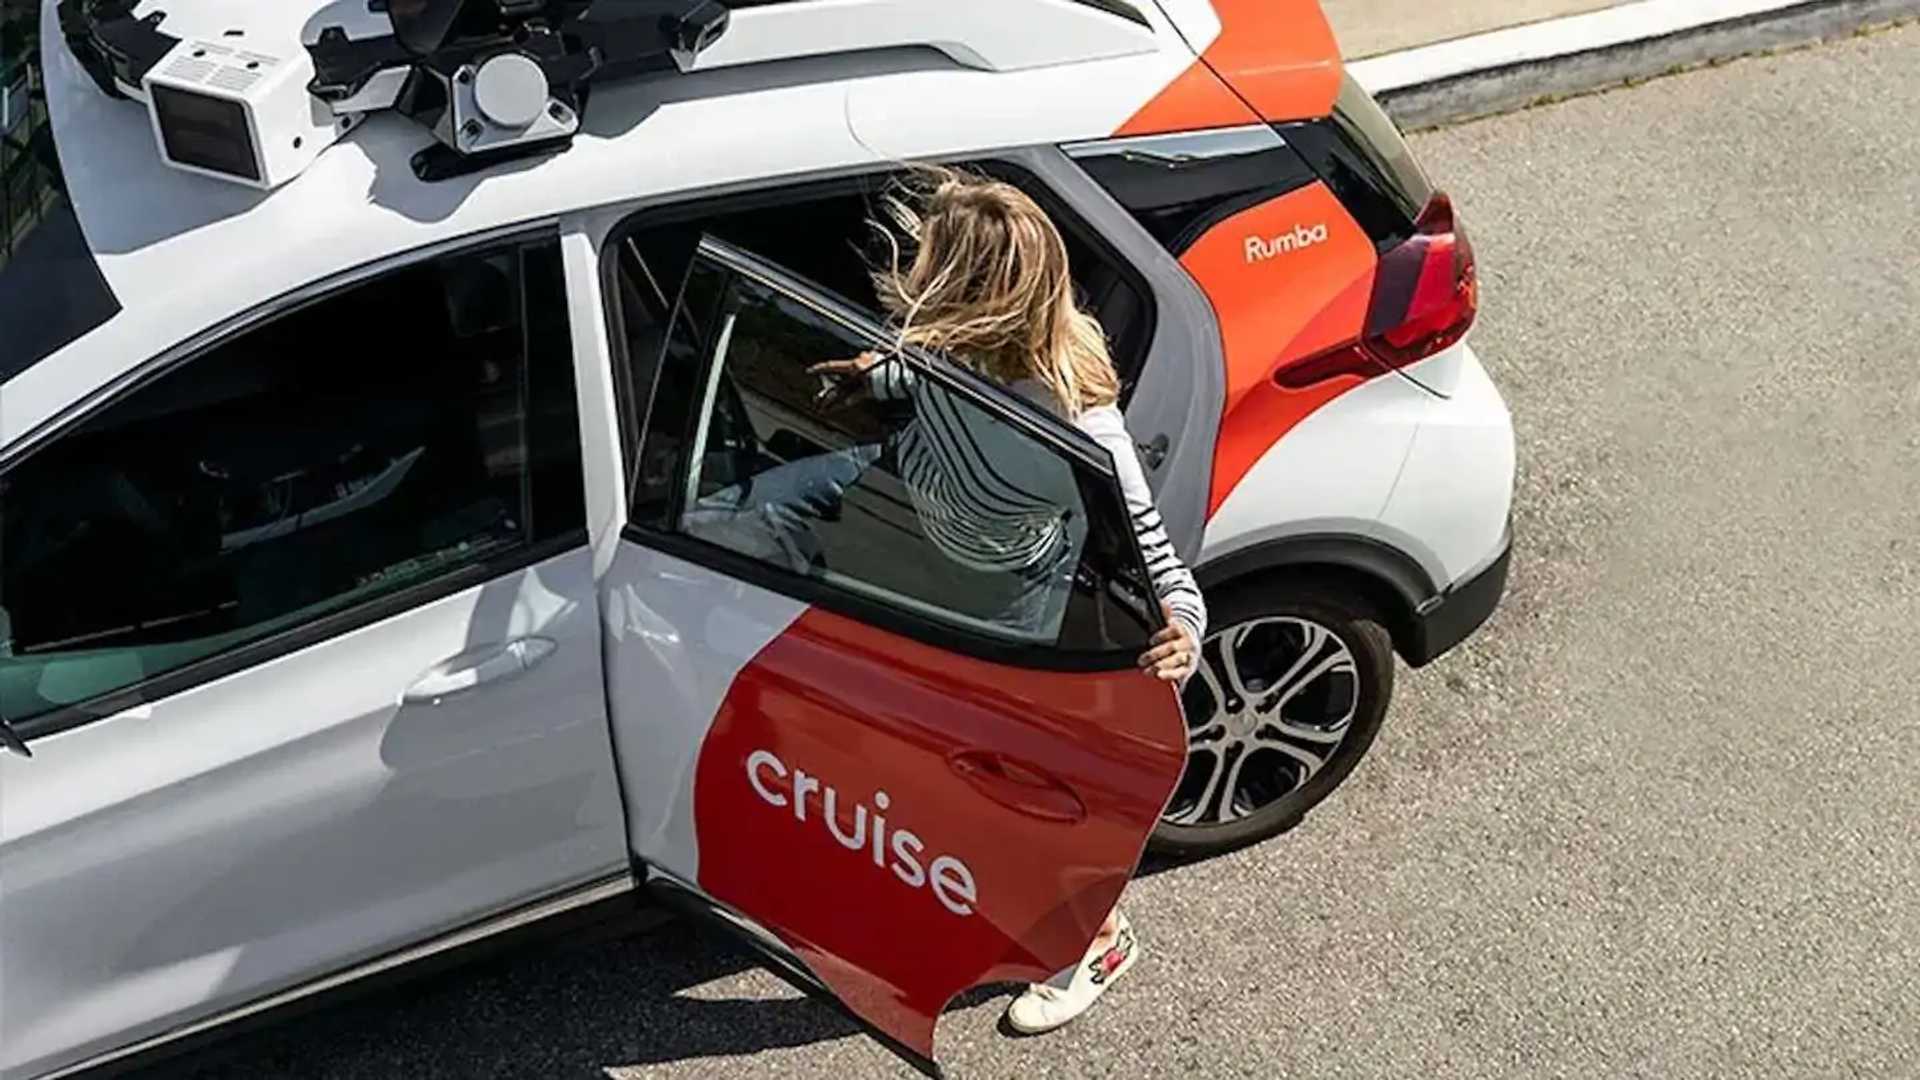 gm's cruise to relaunch driverless robotaxi service on a smaller scale